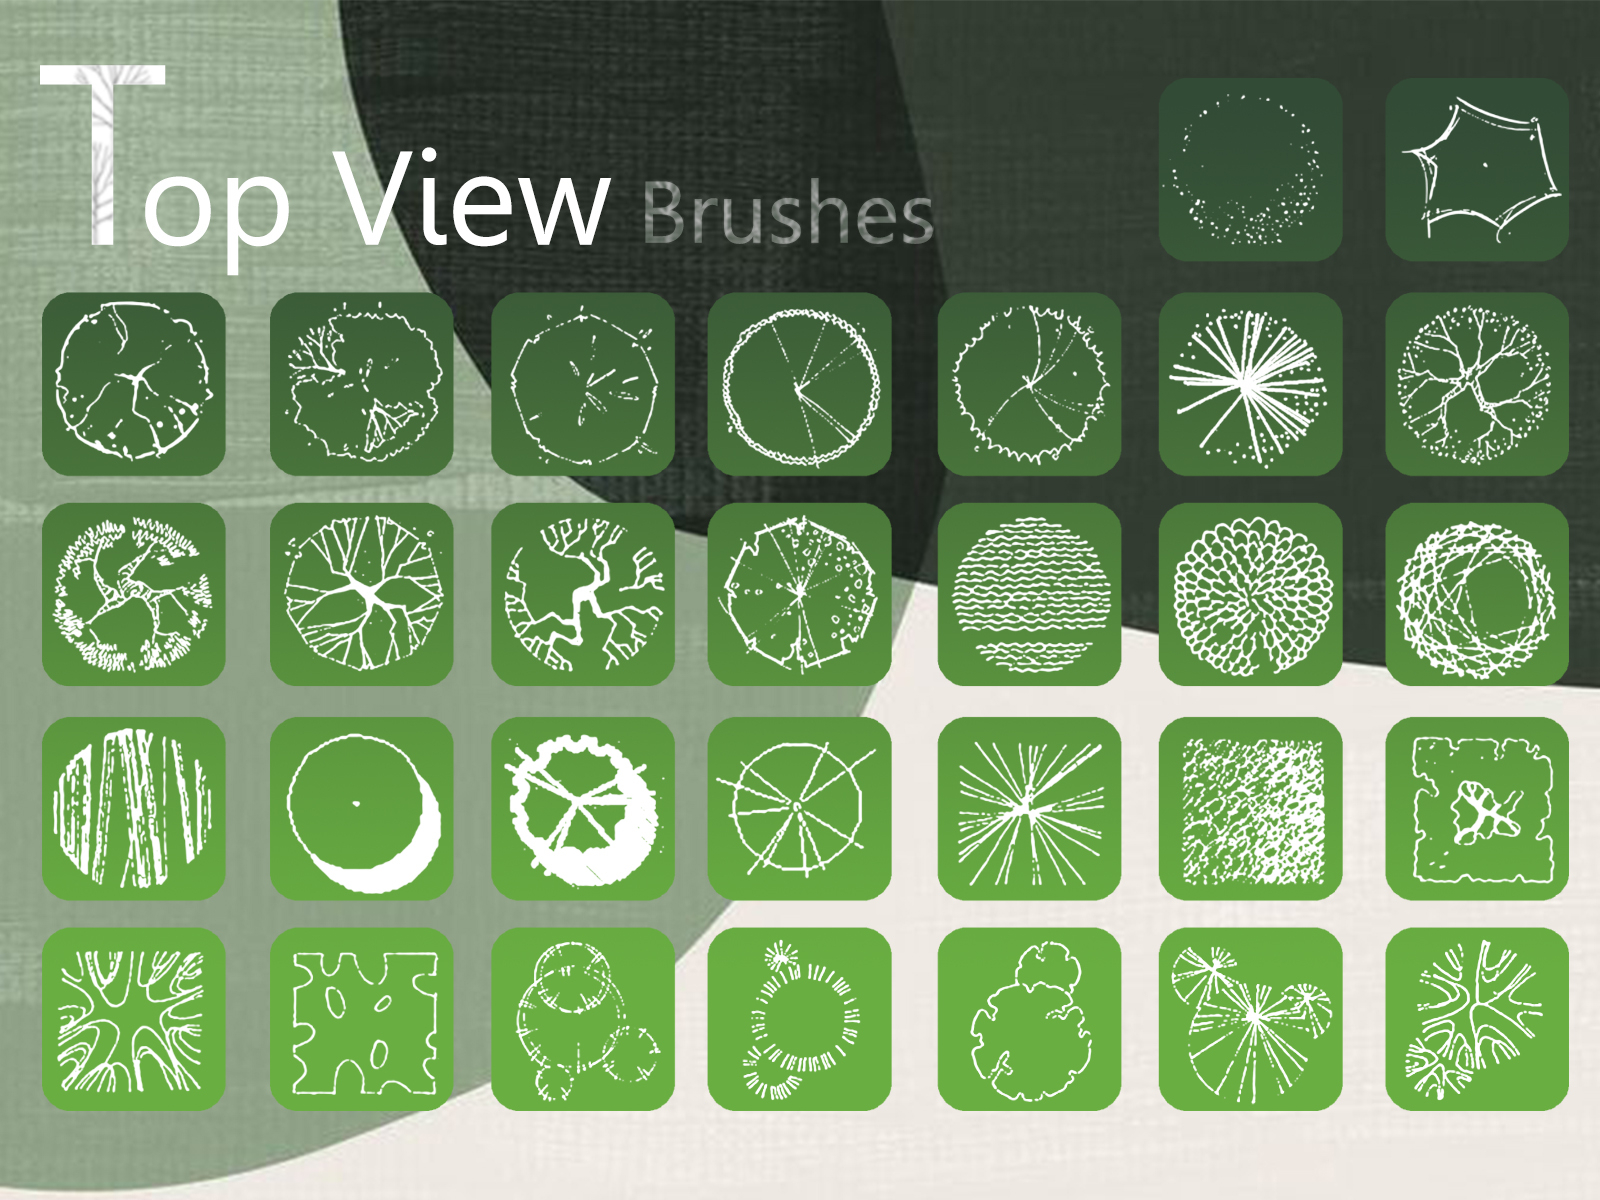 Trees top view brushes for landscape design by Starchi on Dribbble